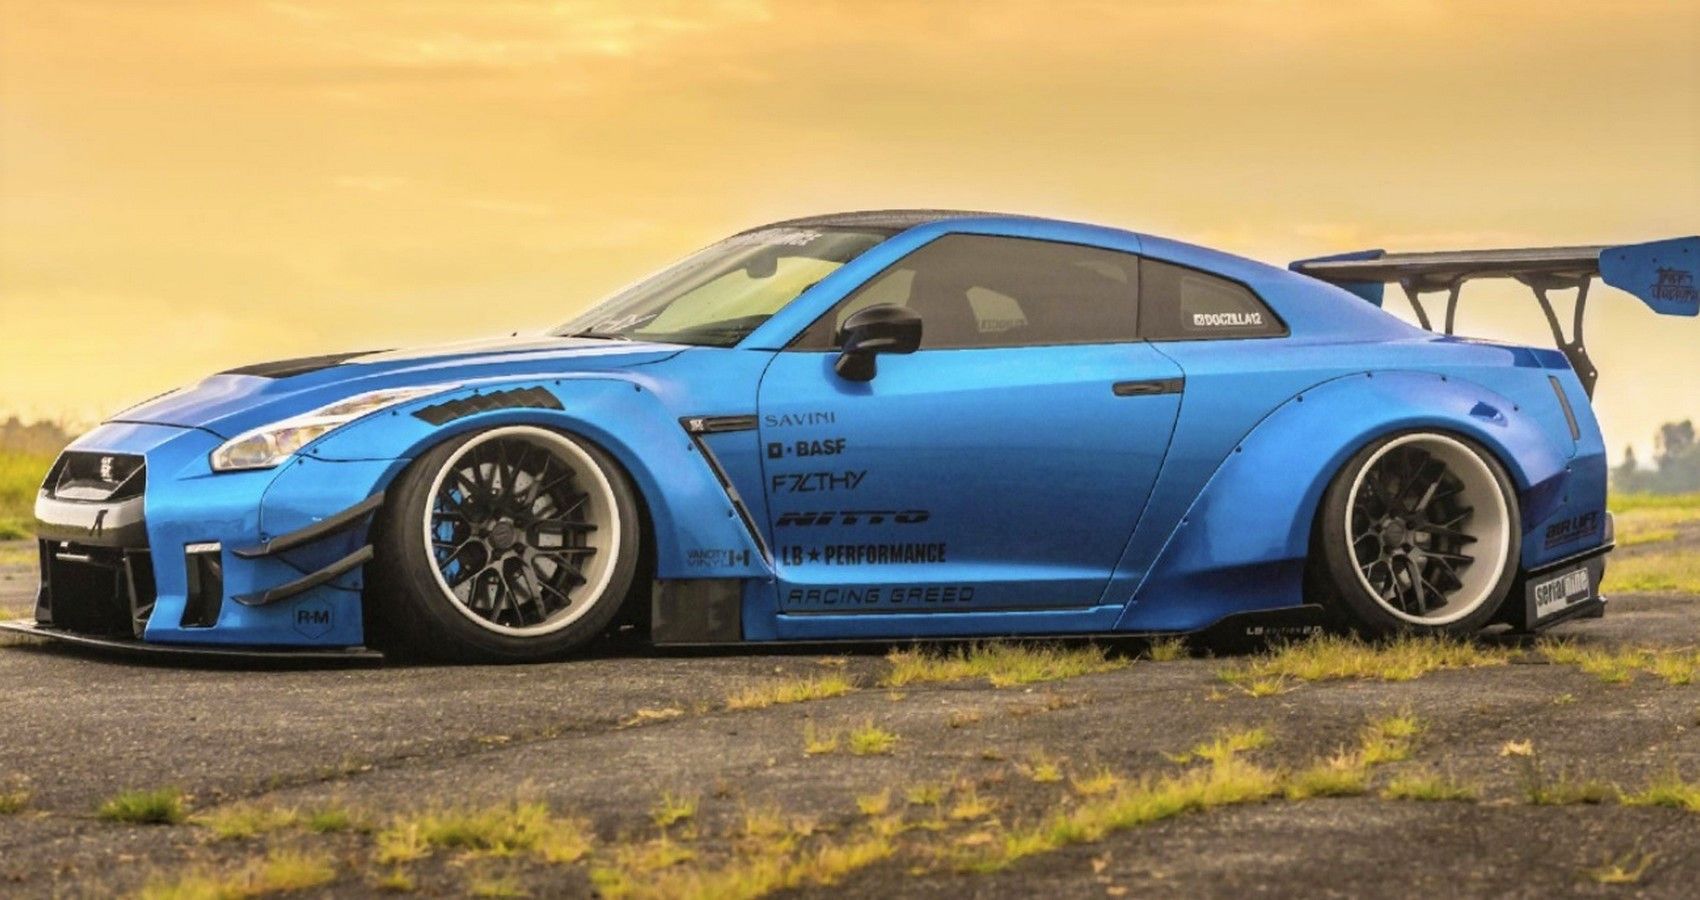 These Japanese Tuners Built The Most Impressive Nissans We've Ever Seen